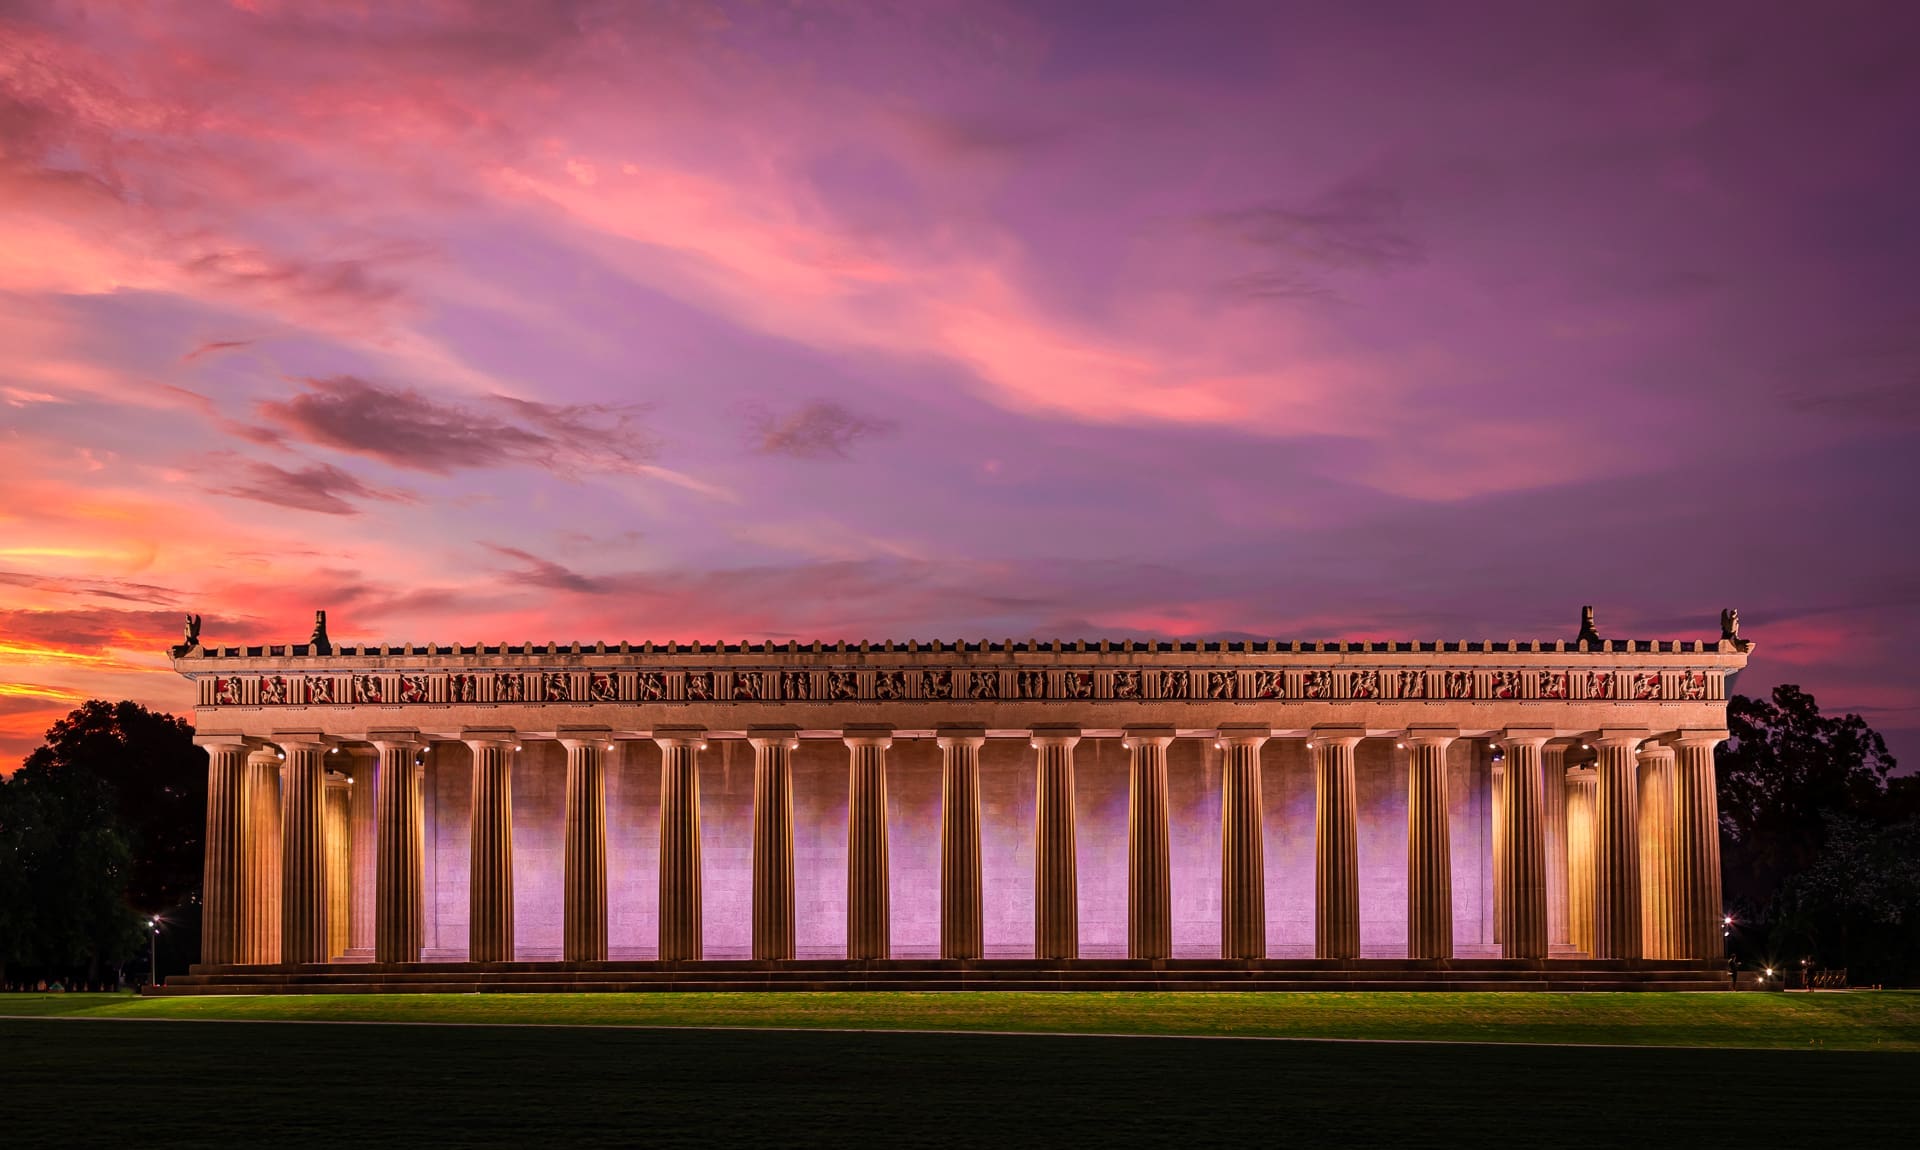 The Parthenon - Civic Architectural and Landscape Photography - Nashville, Tennessee